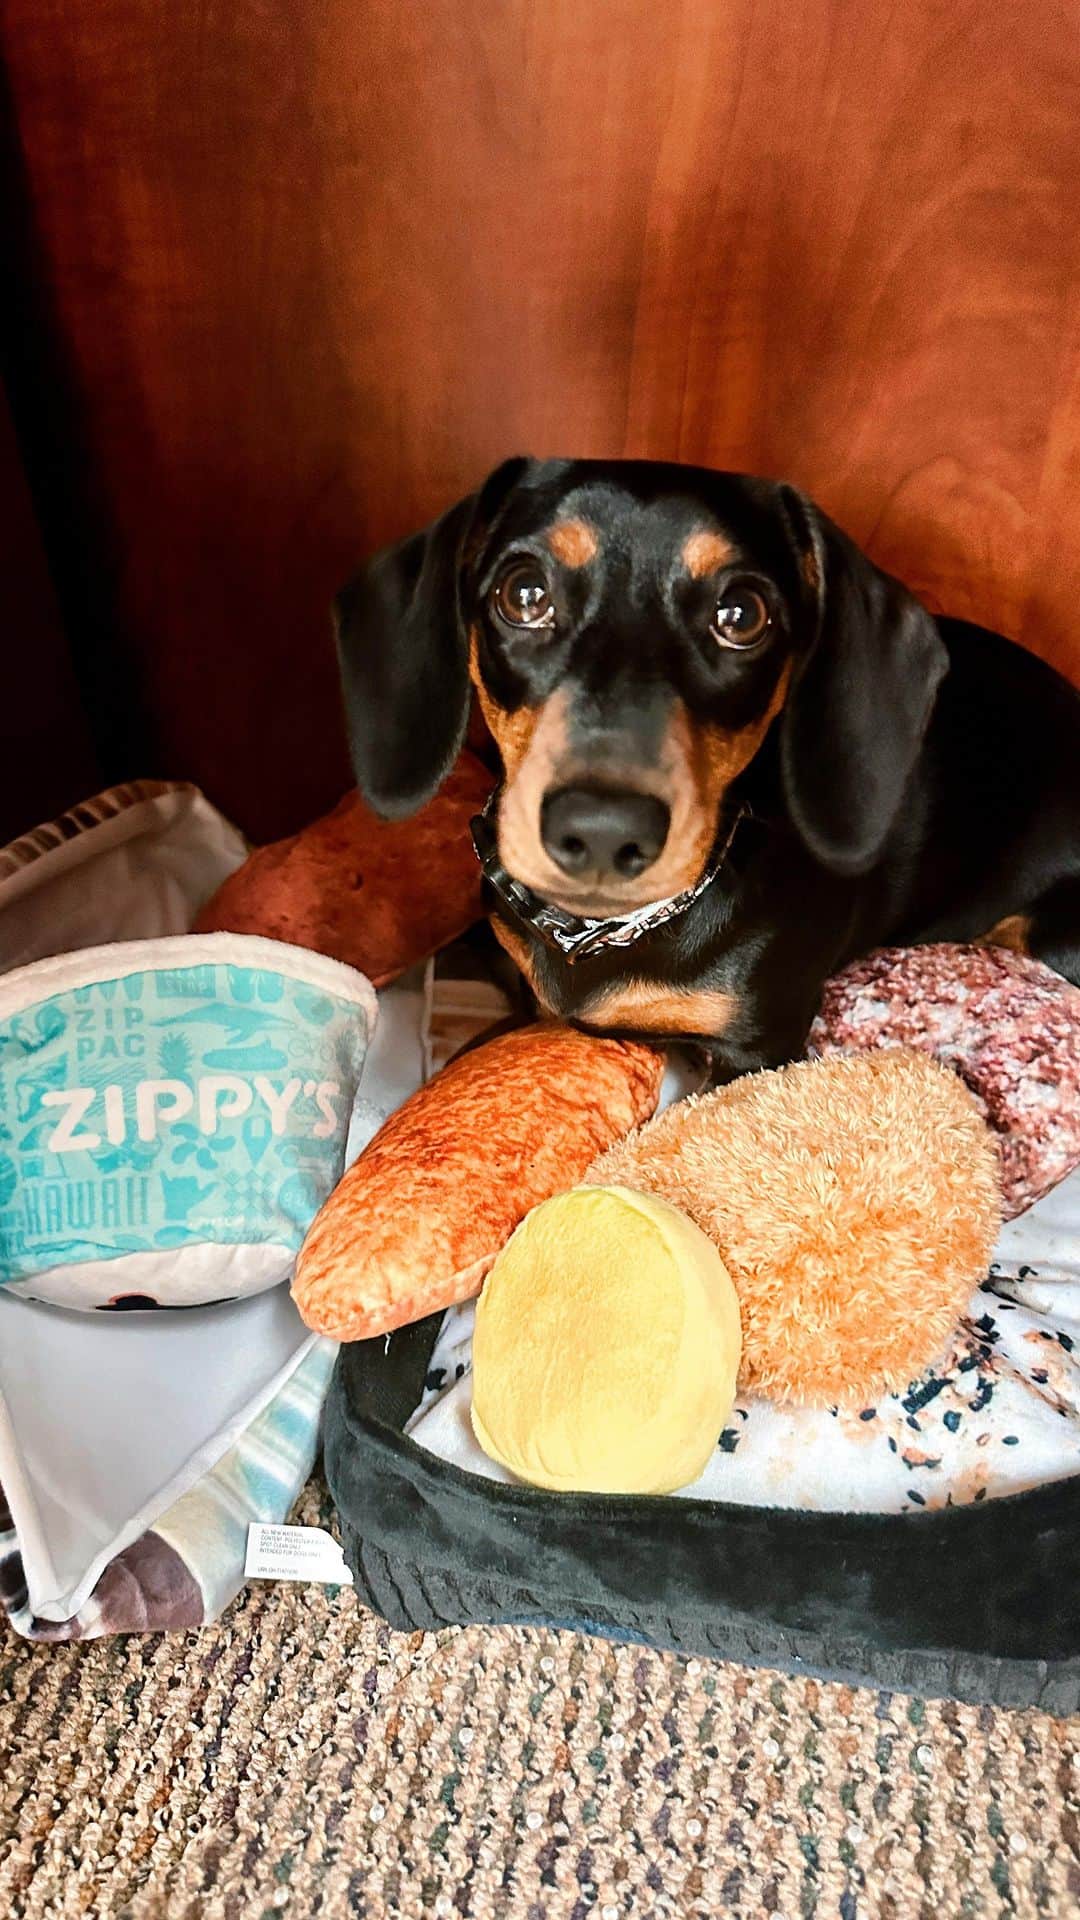 Zippy's Restaurantsのインスタグラム：「POV: You’re the dog during Thanksgiving 🐕 Save up to $30 by ordering your Thanksgiving package online, today! For more information or to pre-order your holiday meal package, visit zippys.com. #NextStopZippys」